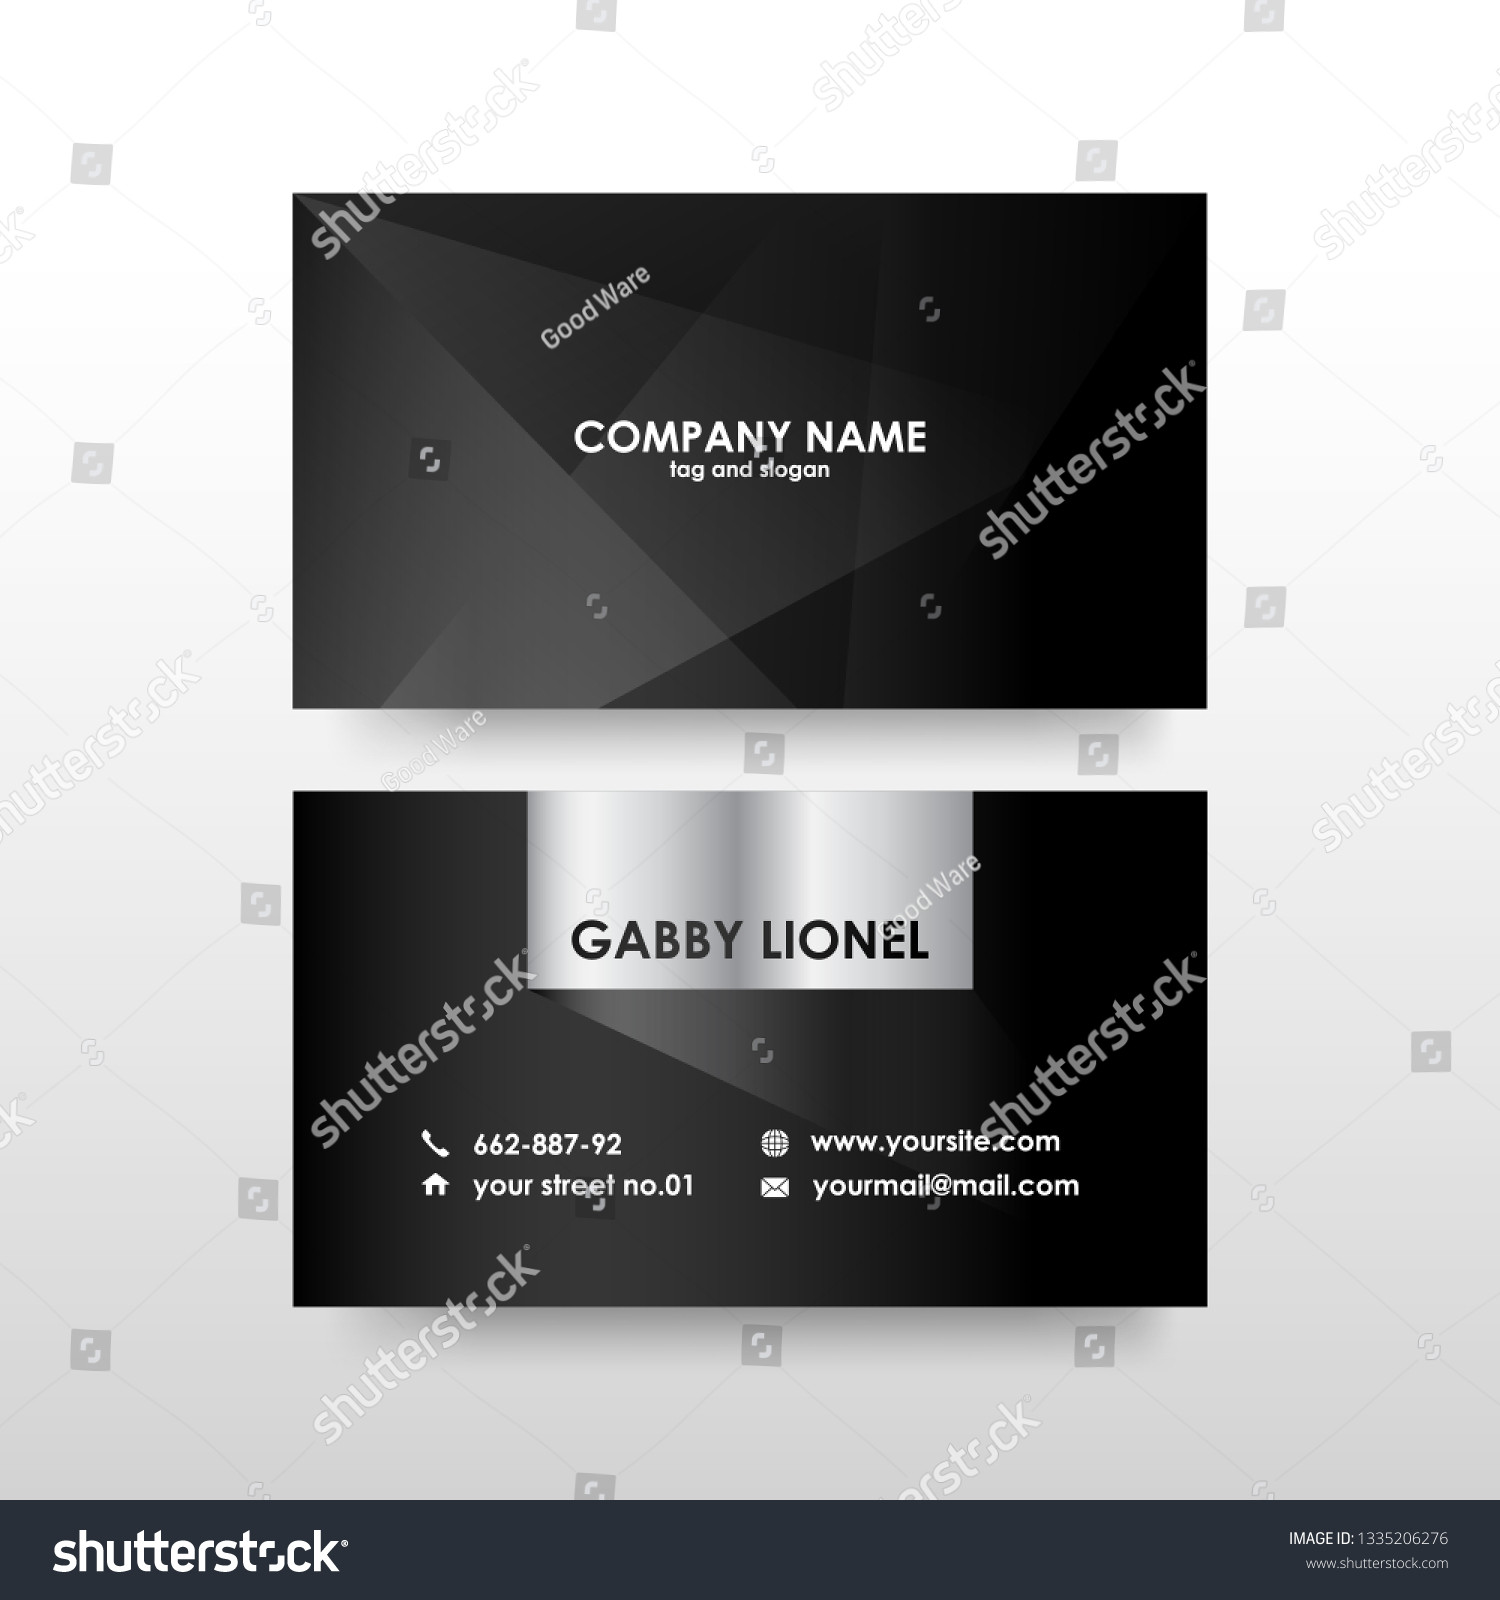 Creative Elegant Double Sided Business Card Stock Vector Of Double Sided Business Card Template